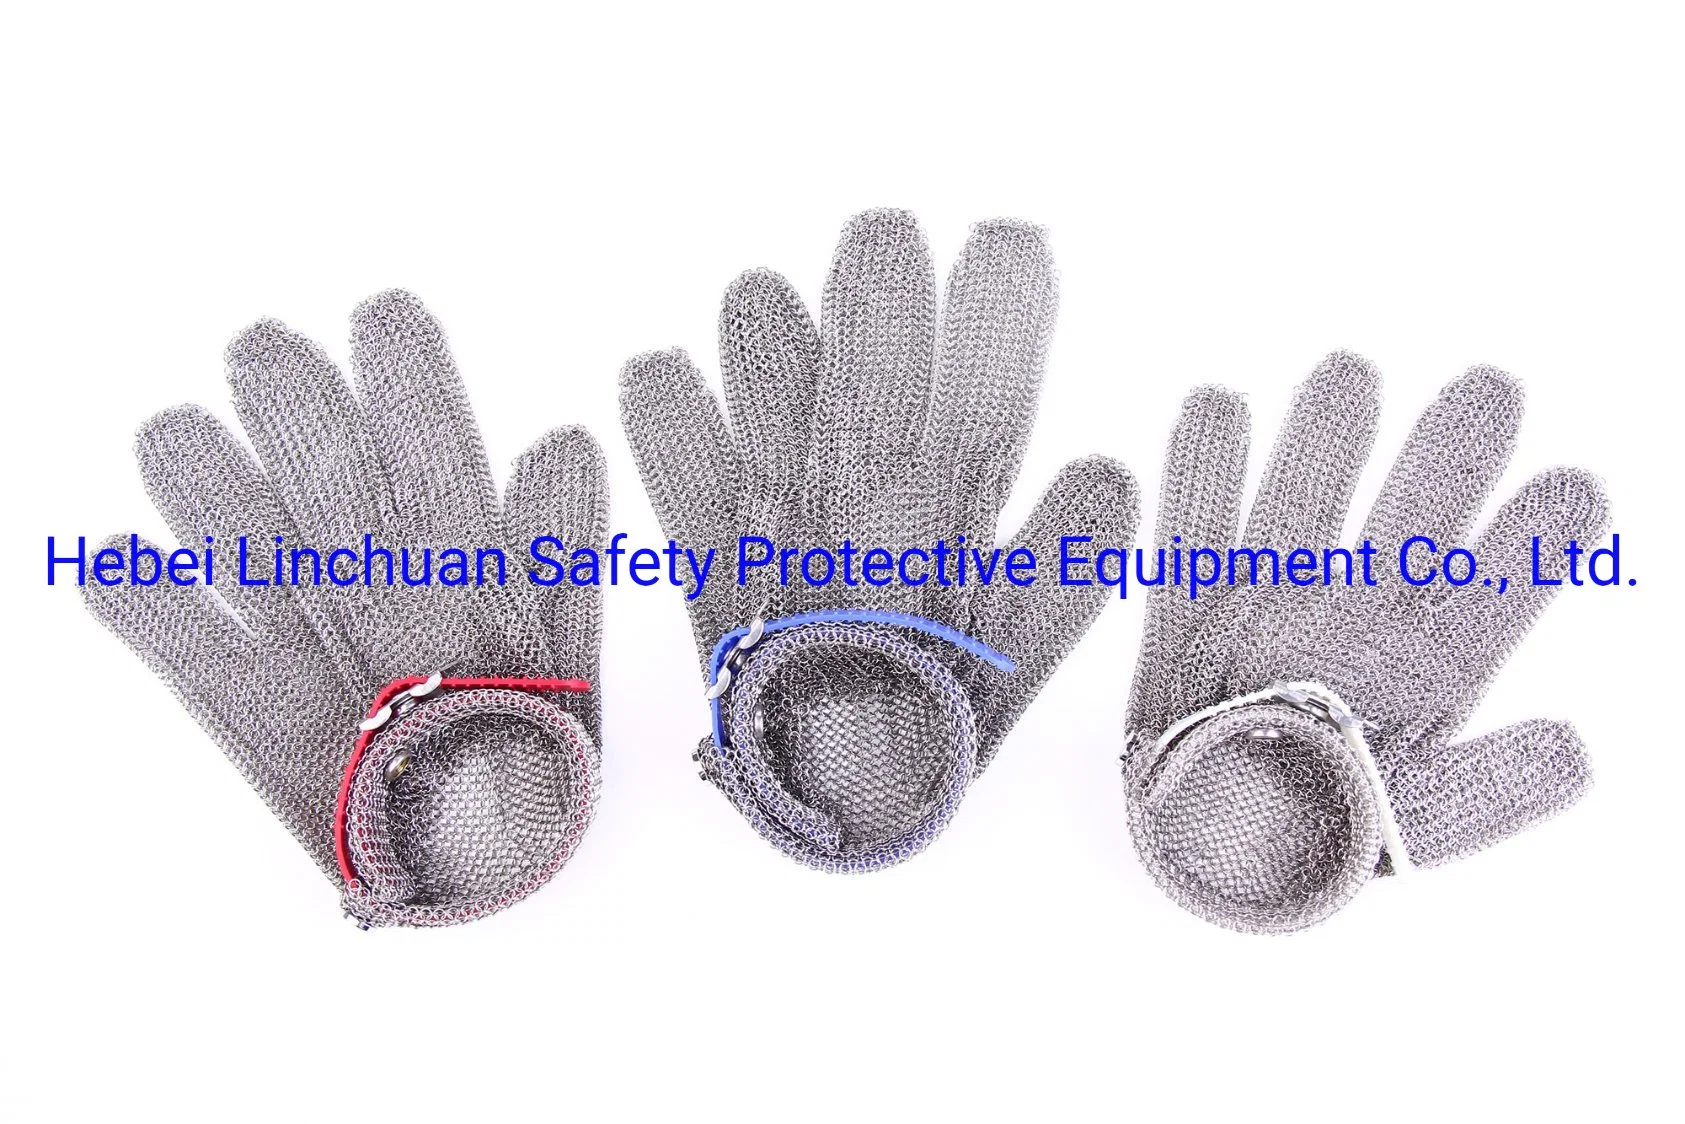 Safety Cut Proof Stab Resistant Stainless Steel Wire Metal Mesh Glove/Cut Protection Steel Glove Anti Cut Fabrics Food Work Cutting Meat Butcher Equipment